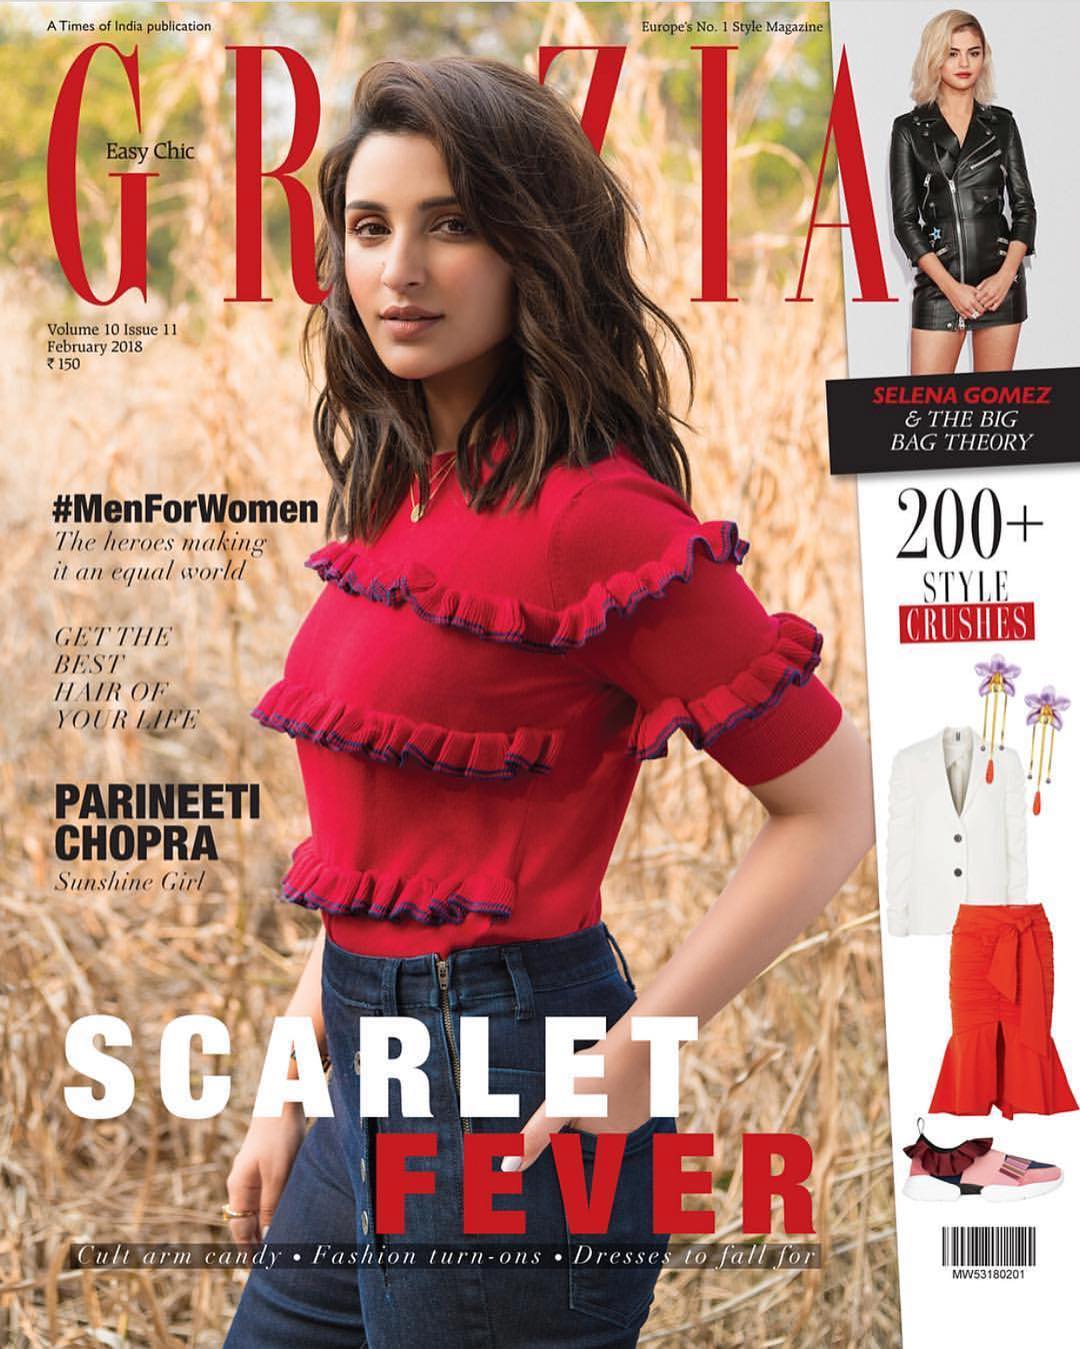 Parineeti Chopra keeps it chic in the ruffled top and denims on the Grazia cover. 